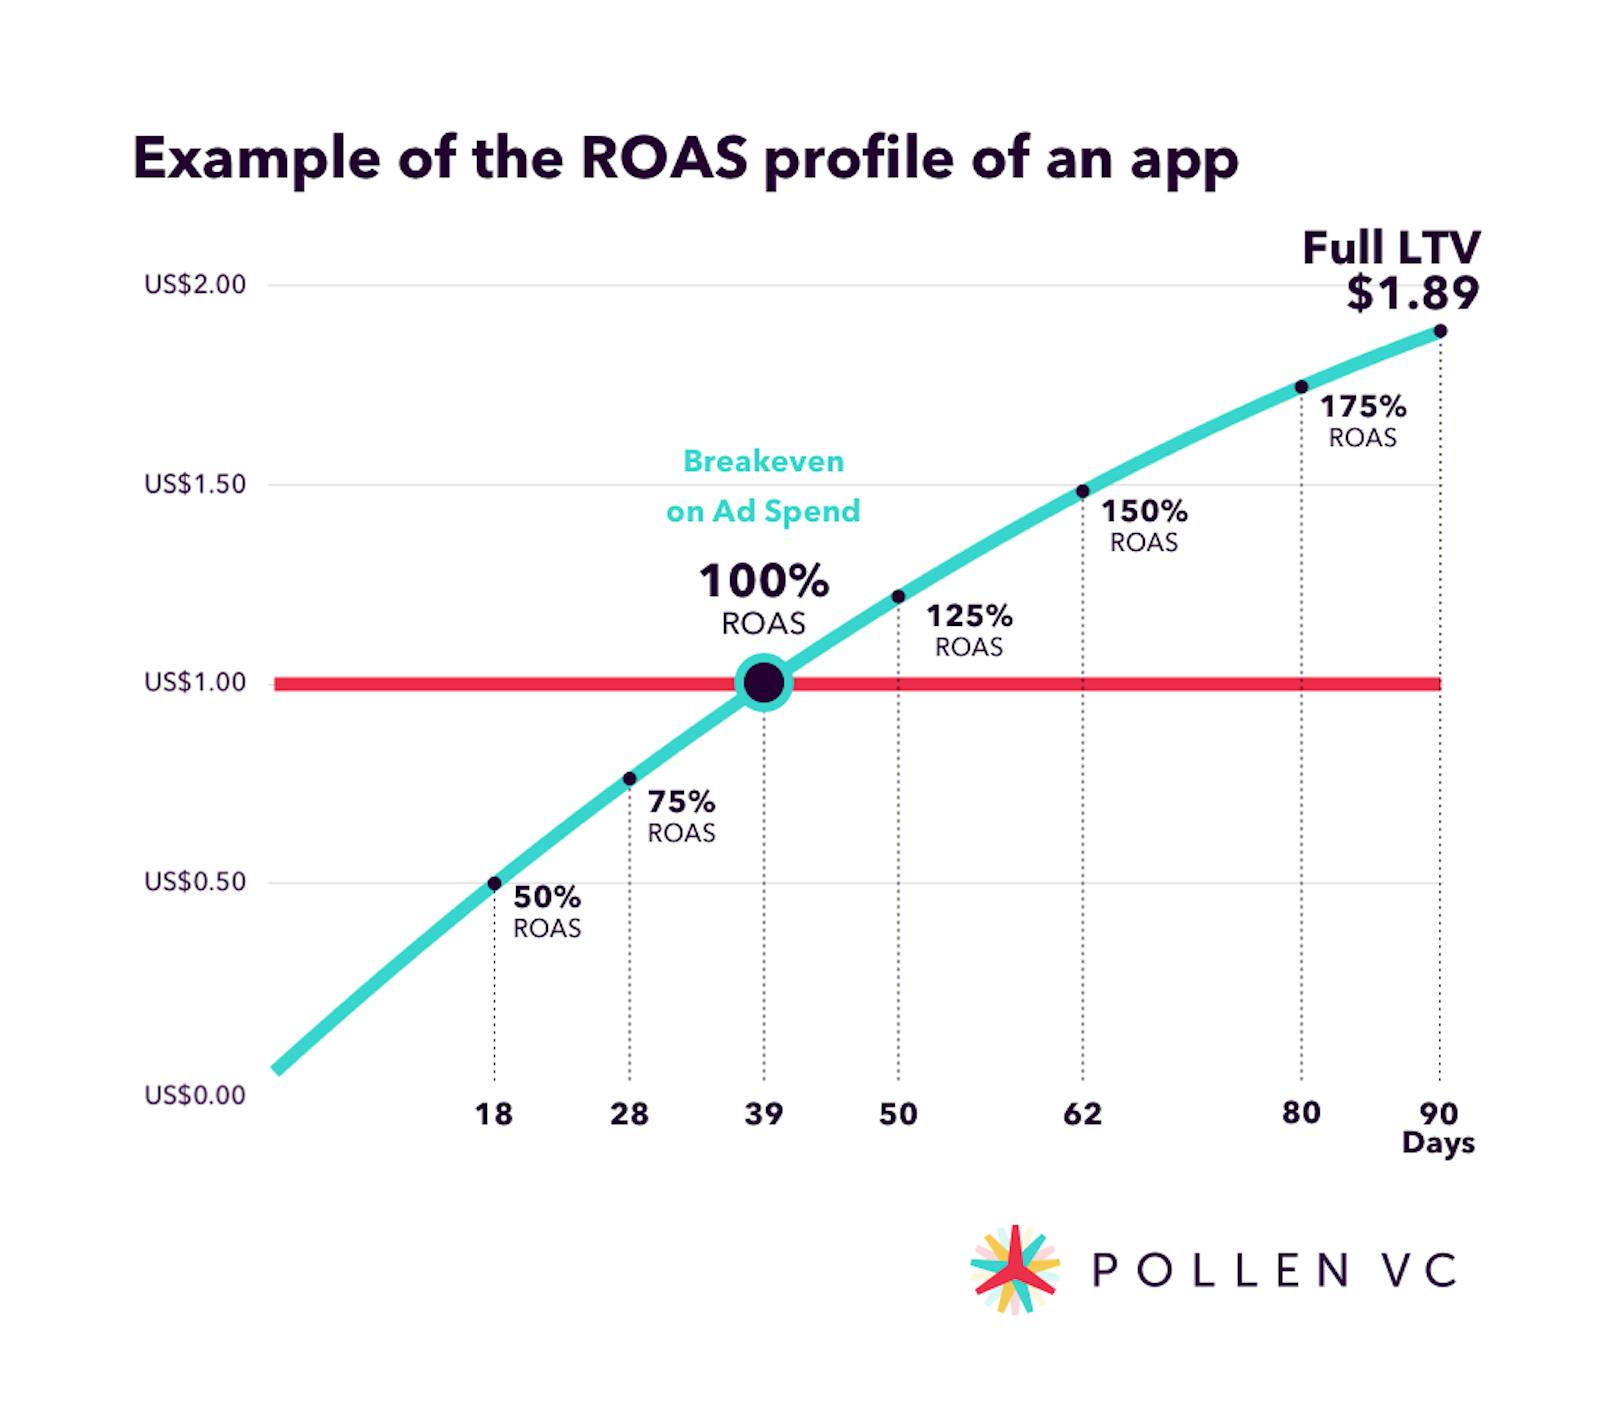 Example of the ROAS profile of an app